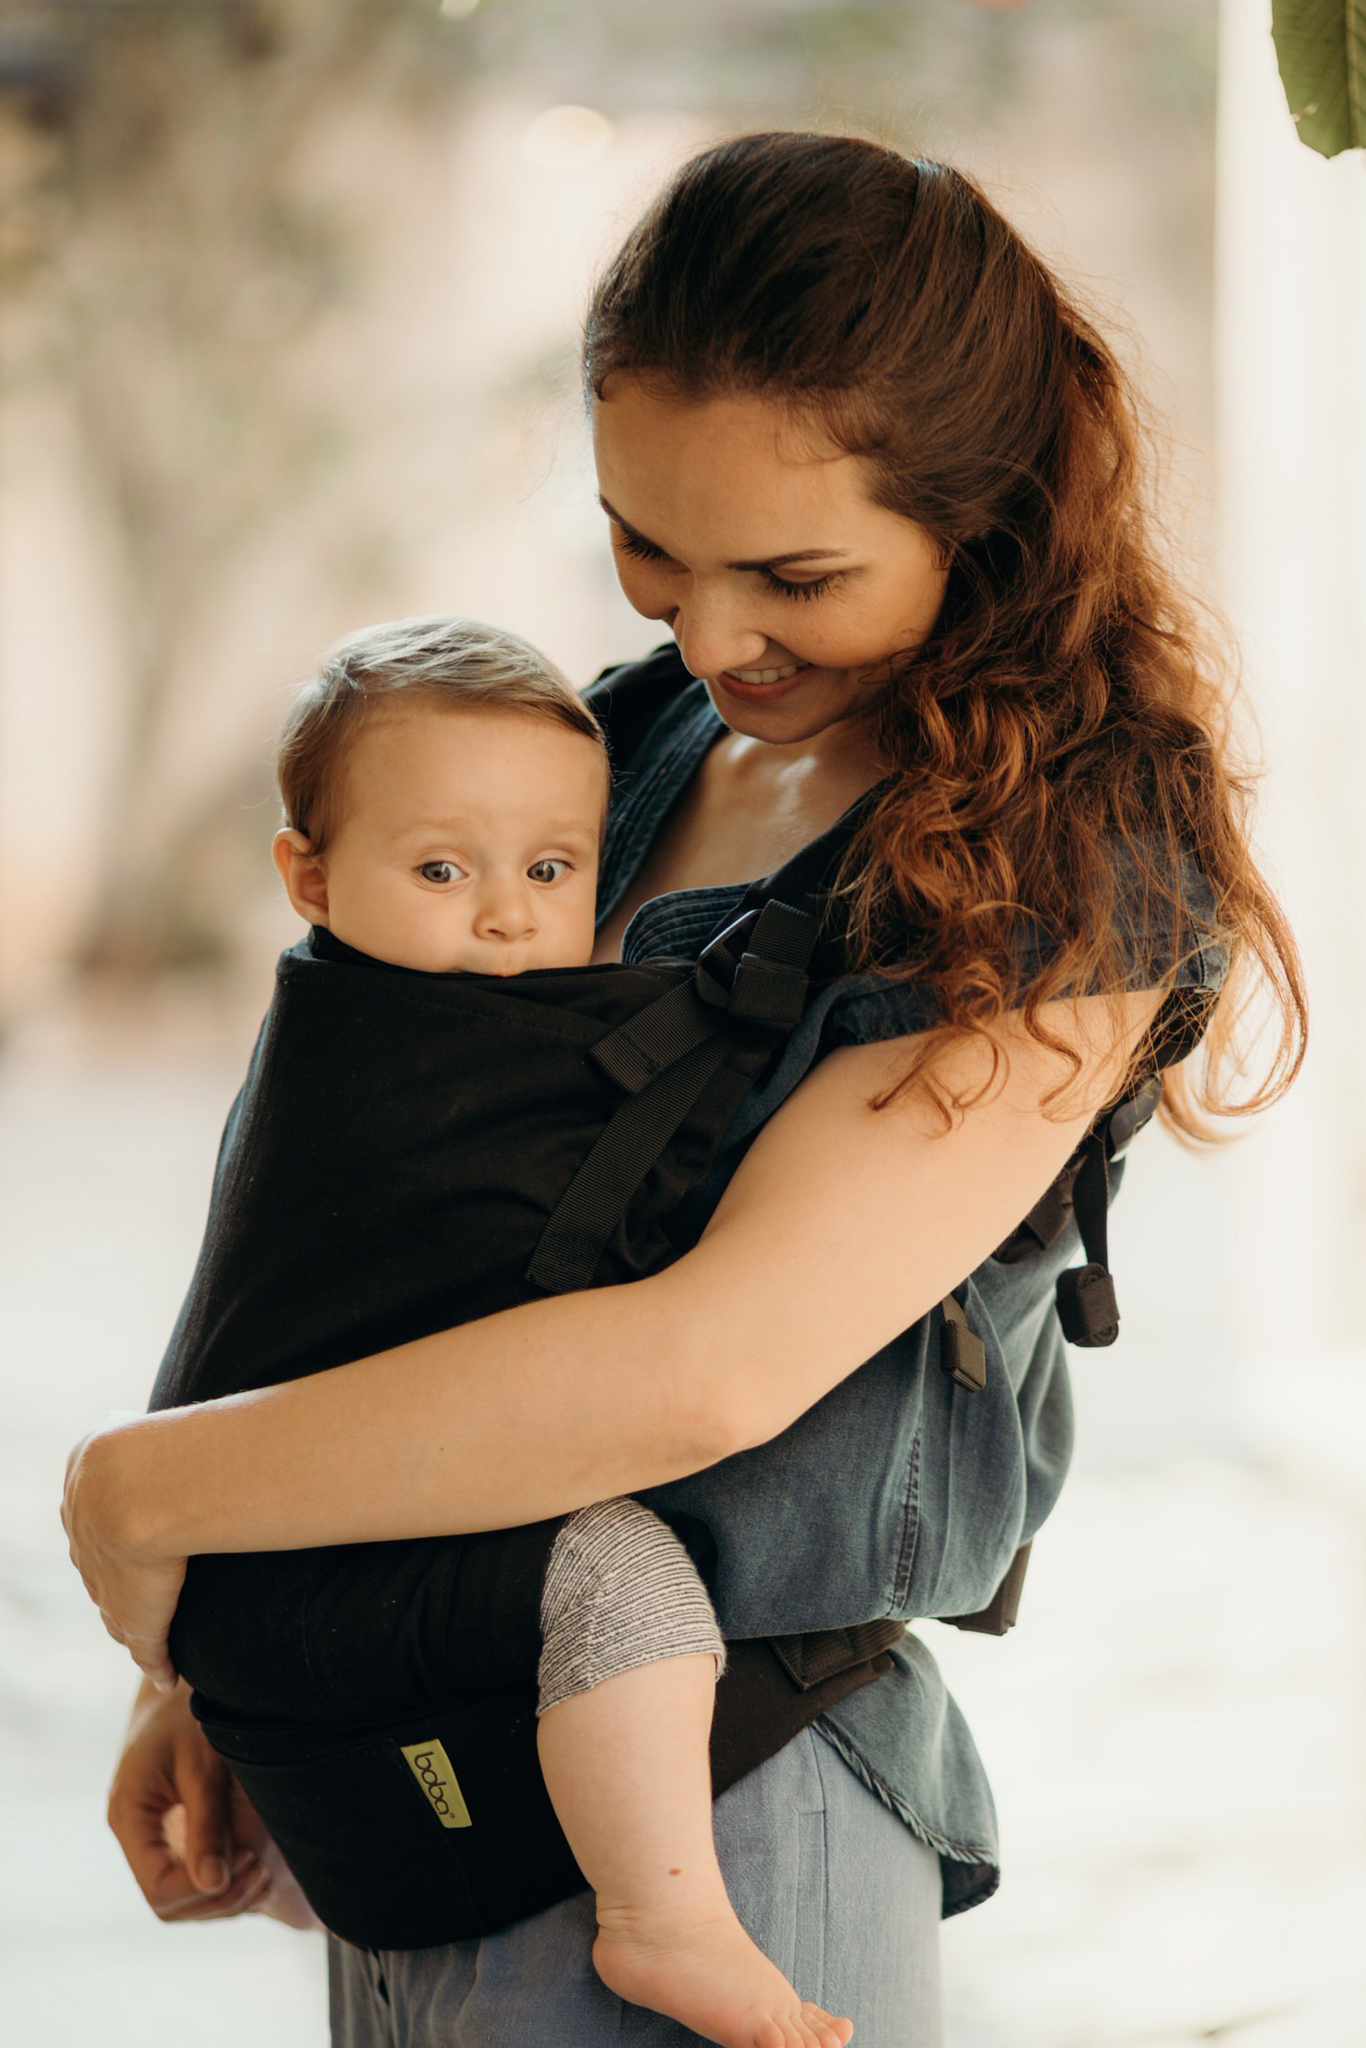 Make sure your baby is secure and comfortable with the Boba X baby carrier in black! Featuring adjustable straps for babies 0-36+ months or 7lbs to 45 lbs (3,5 - 20 kg), with top marks for adjustability, softness and support.